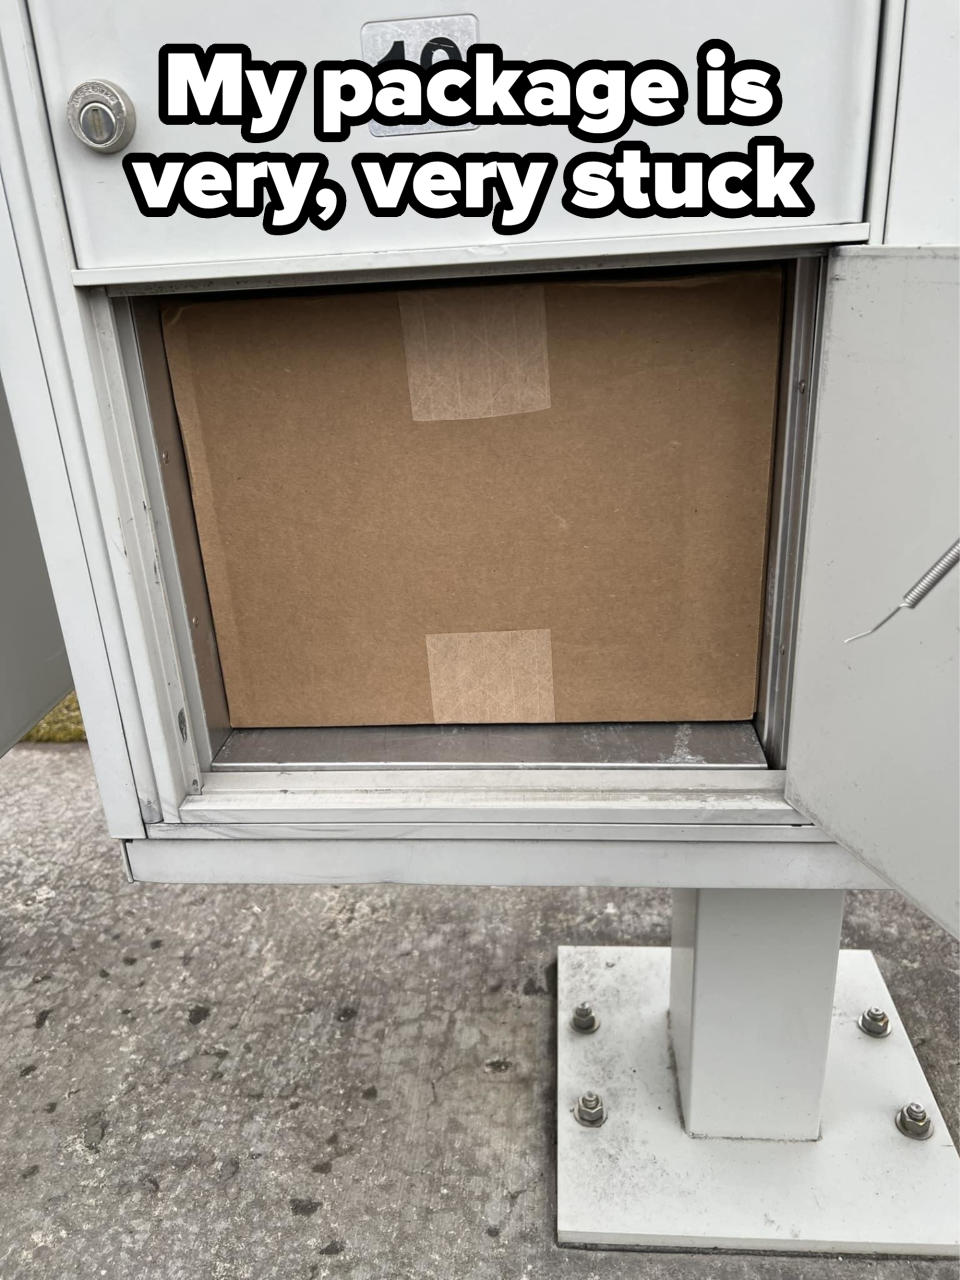 Package in a mailbox slot, secured with tape, visible through an open door